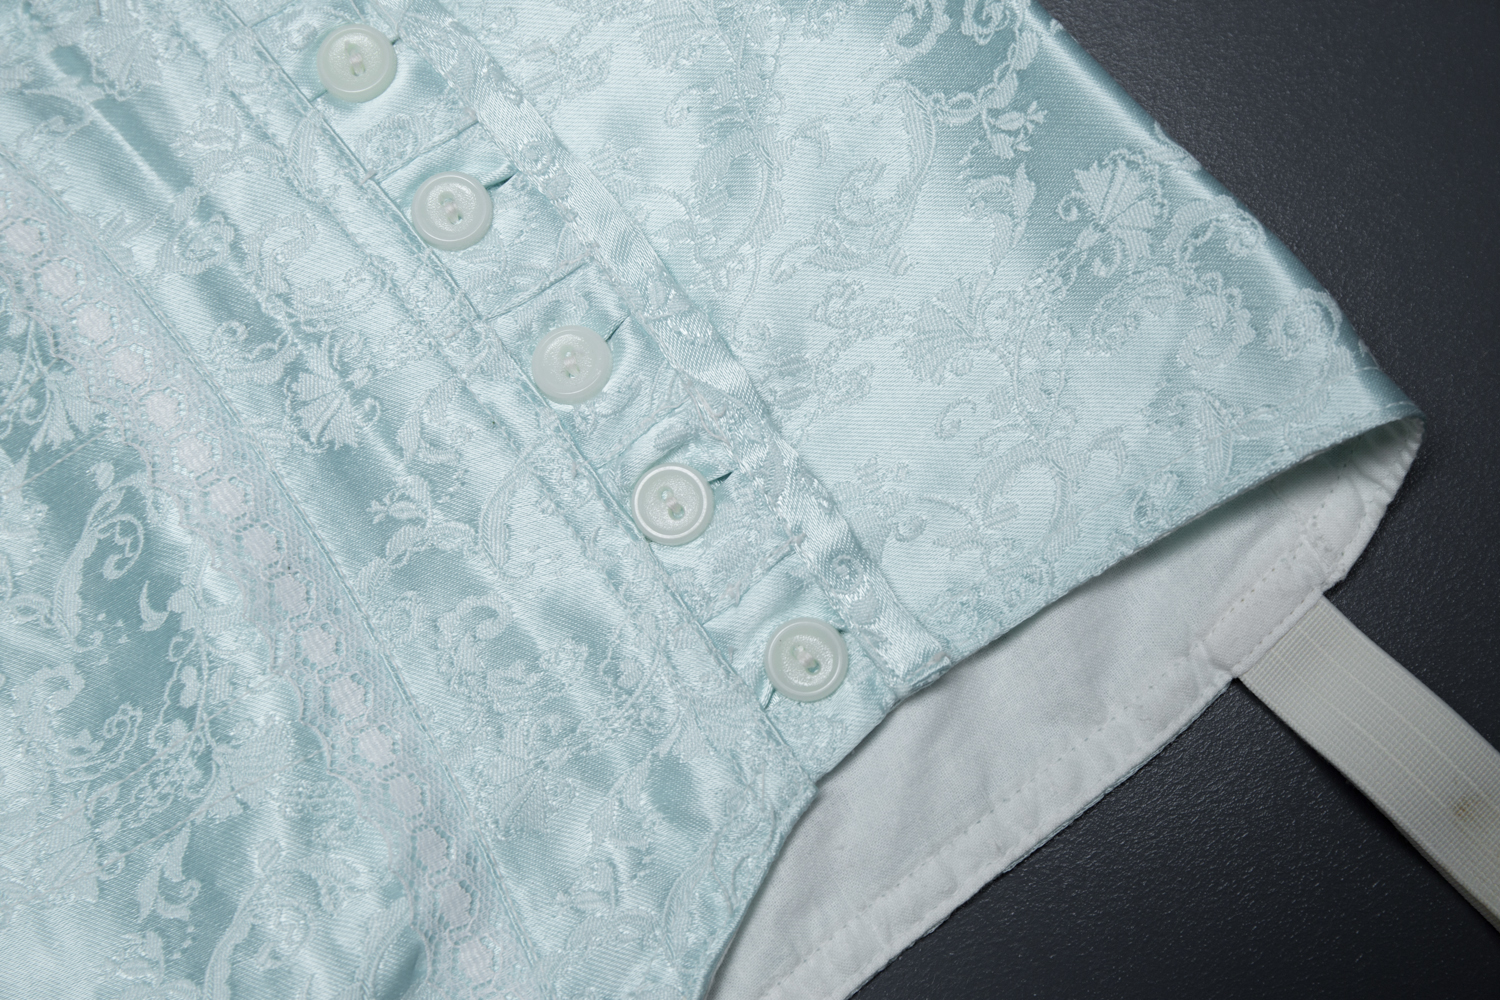 Homemade Pale Blue Jacquard Weave Suspender Belt With Plastic Garter Clips, c. 1950s, Russia. The Underpinnings Museum. Photography by Tigz Rice.